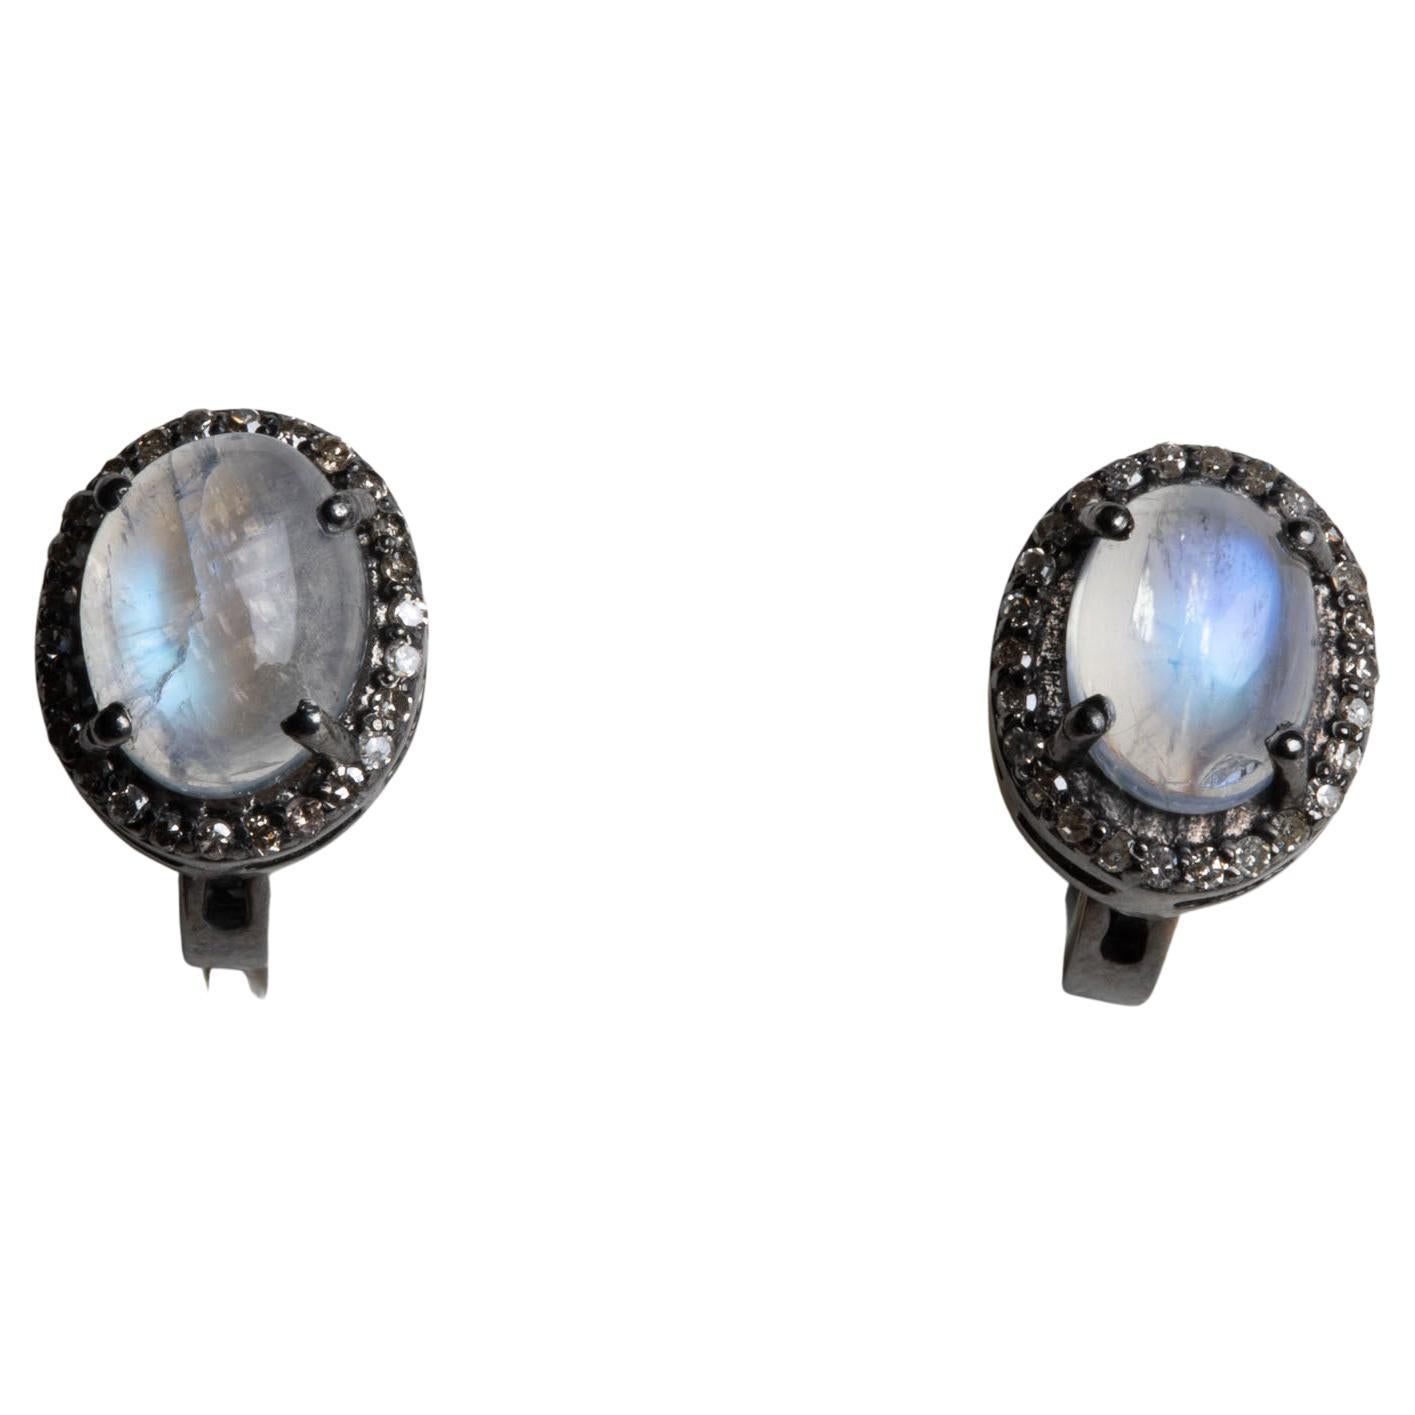 Large cabochon rainbow moonstones bordered by round-cut diamonds in a pave` setting in oxidized sterling silver.  Beautiful blue iridescence to the moonstones.  Diamonds total .32 carats, moonstones total 2.40 carats.  French clip for pierced ears.